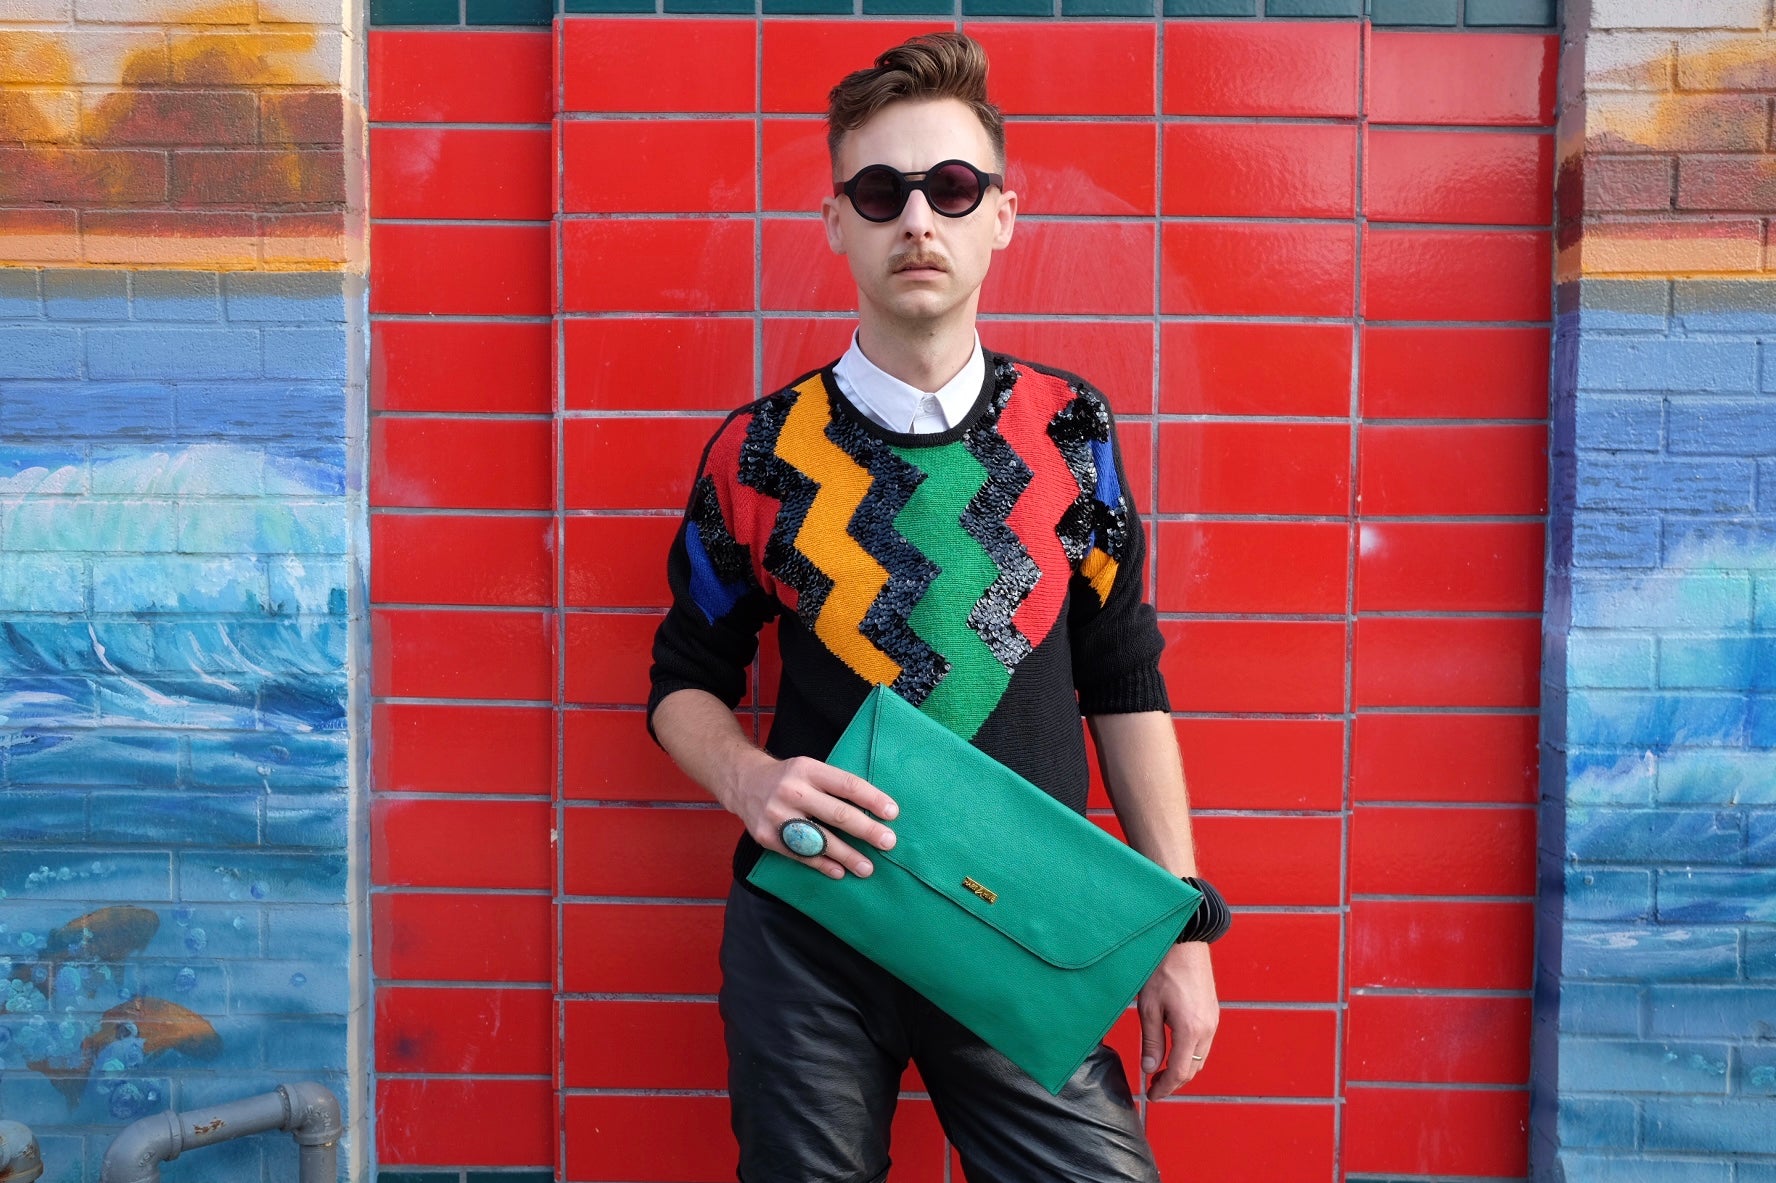 Queer man in 80’s sweater is holding a green leather envelop